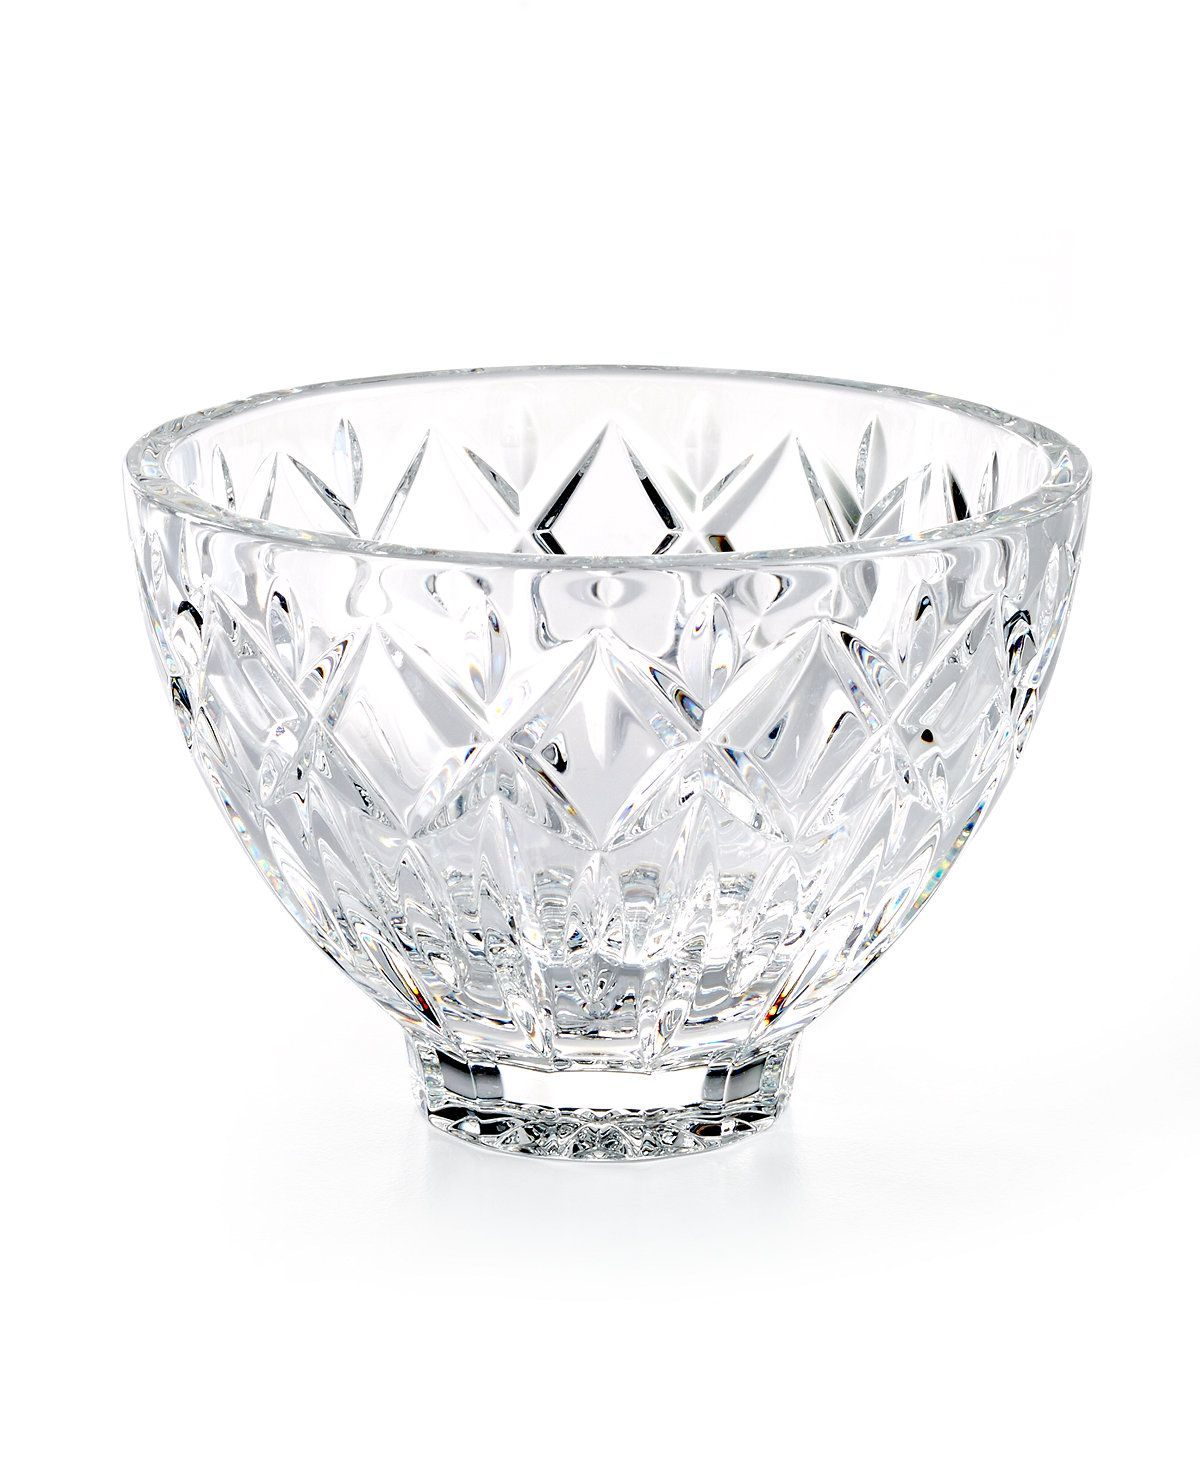 Waterford Crystal Welcome Bowl Bowls Vases Macys intended for proportions 1200 X 1467